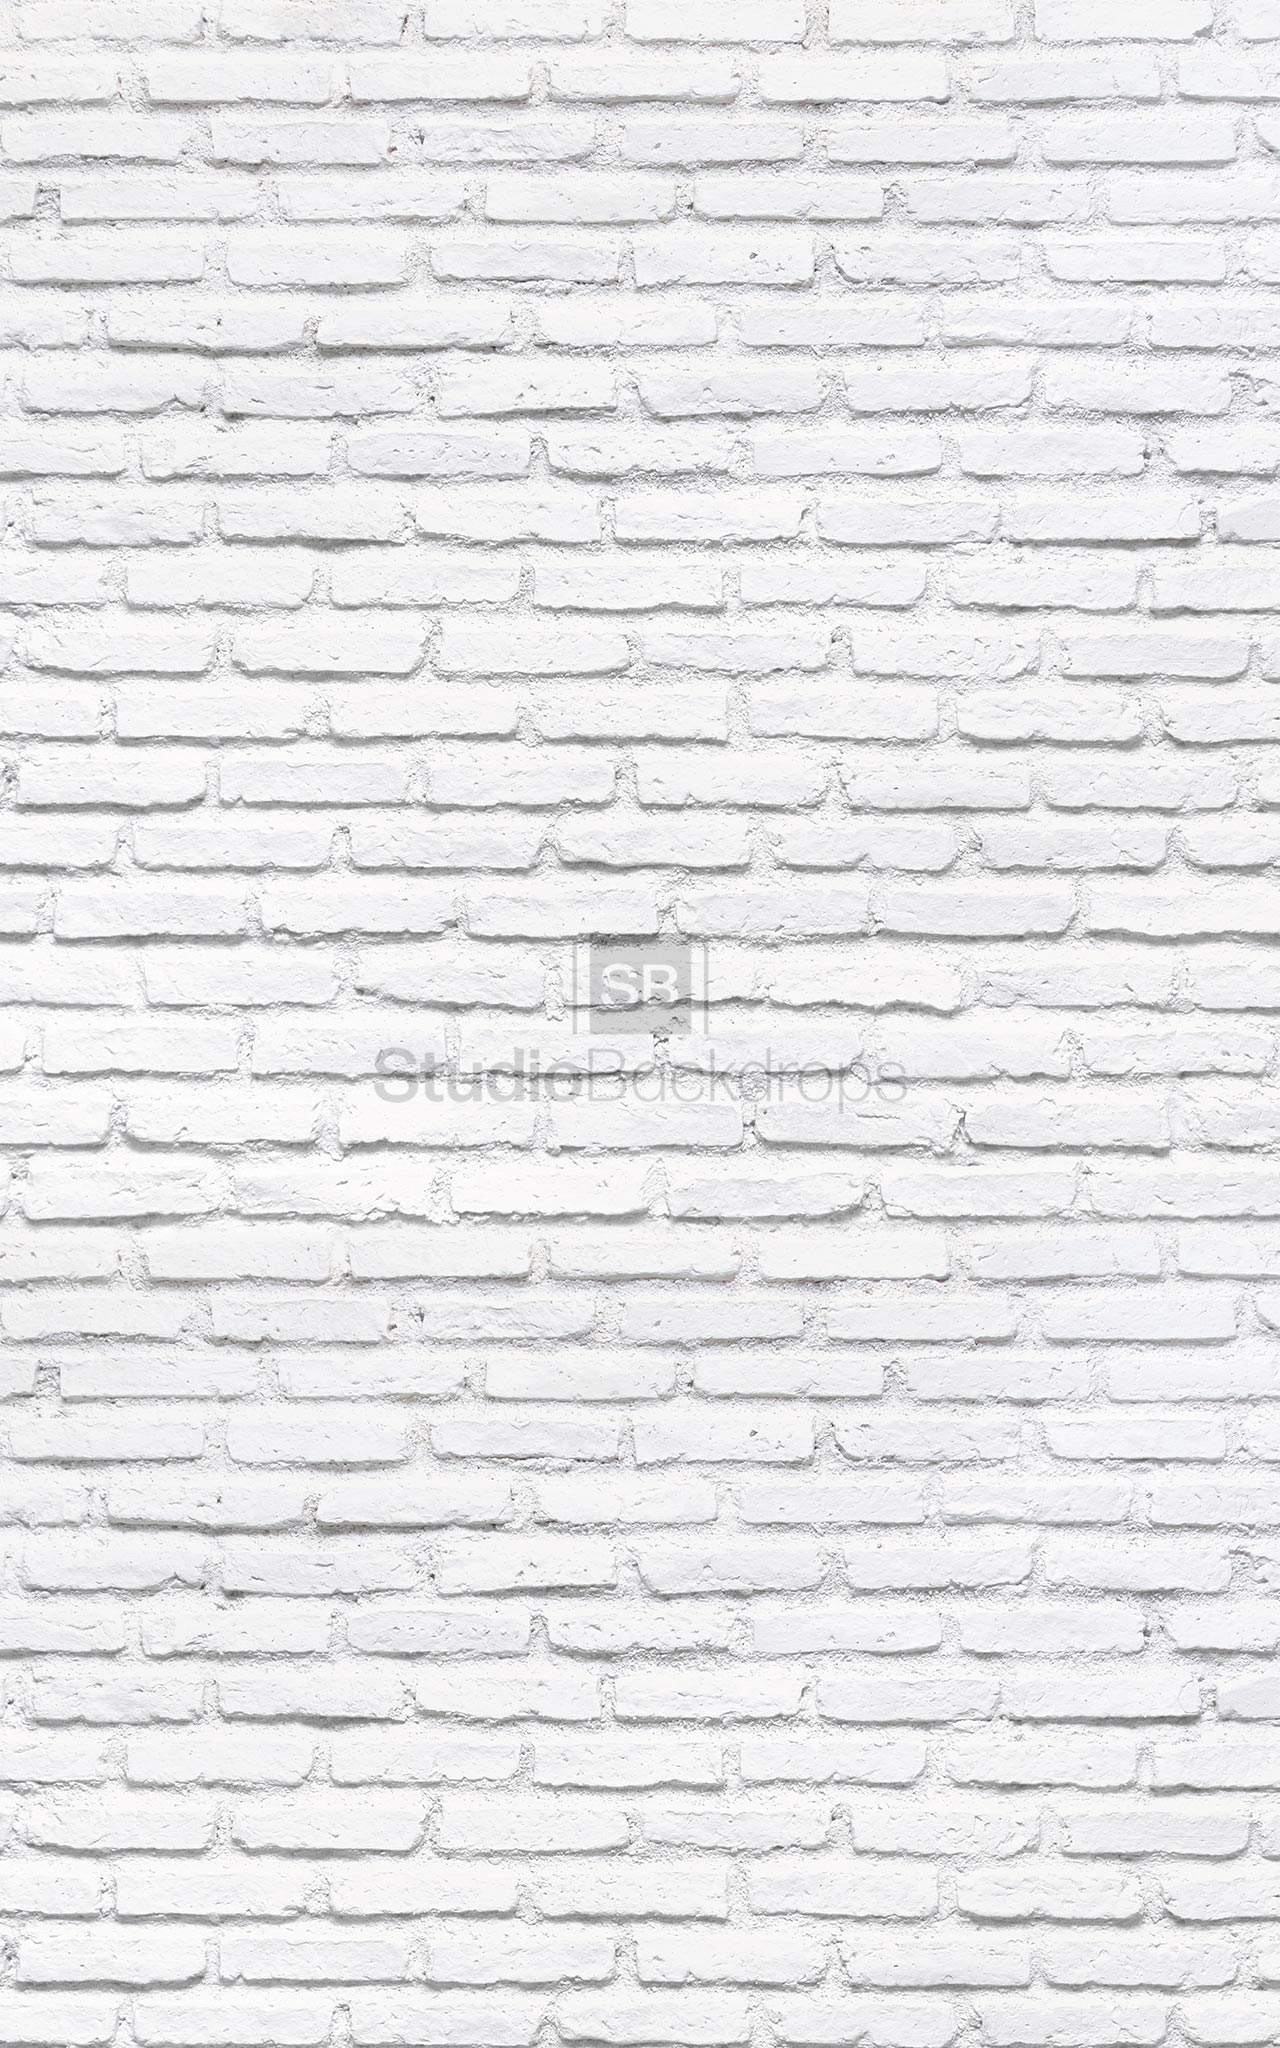 Painted White Brick Wall Photography Backdrop 110 Stb Studio Backdrops